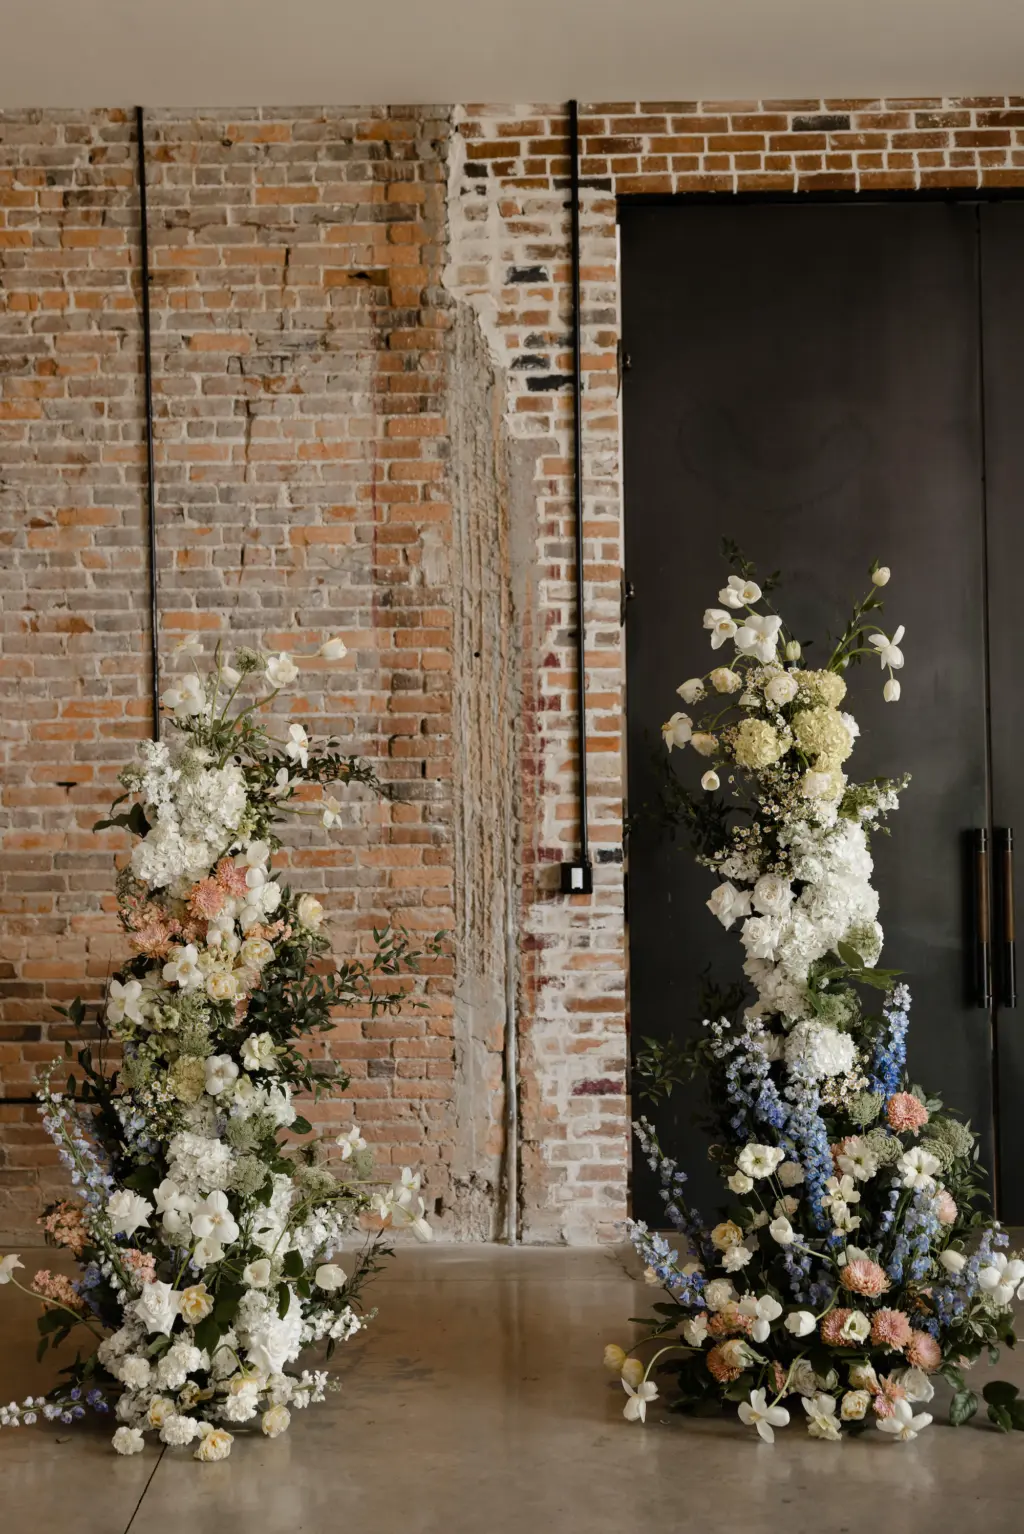 Spring Asymmetrical Wedding Ceremony Flower Arch Ideas with Blue Stock Flowers, Yellow Hydrangeas, Pink Chrysanthemums, and Greenery